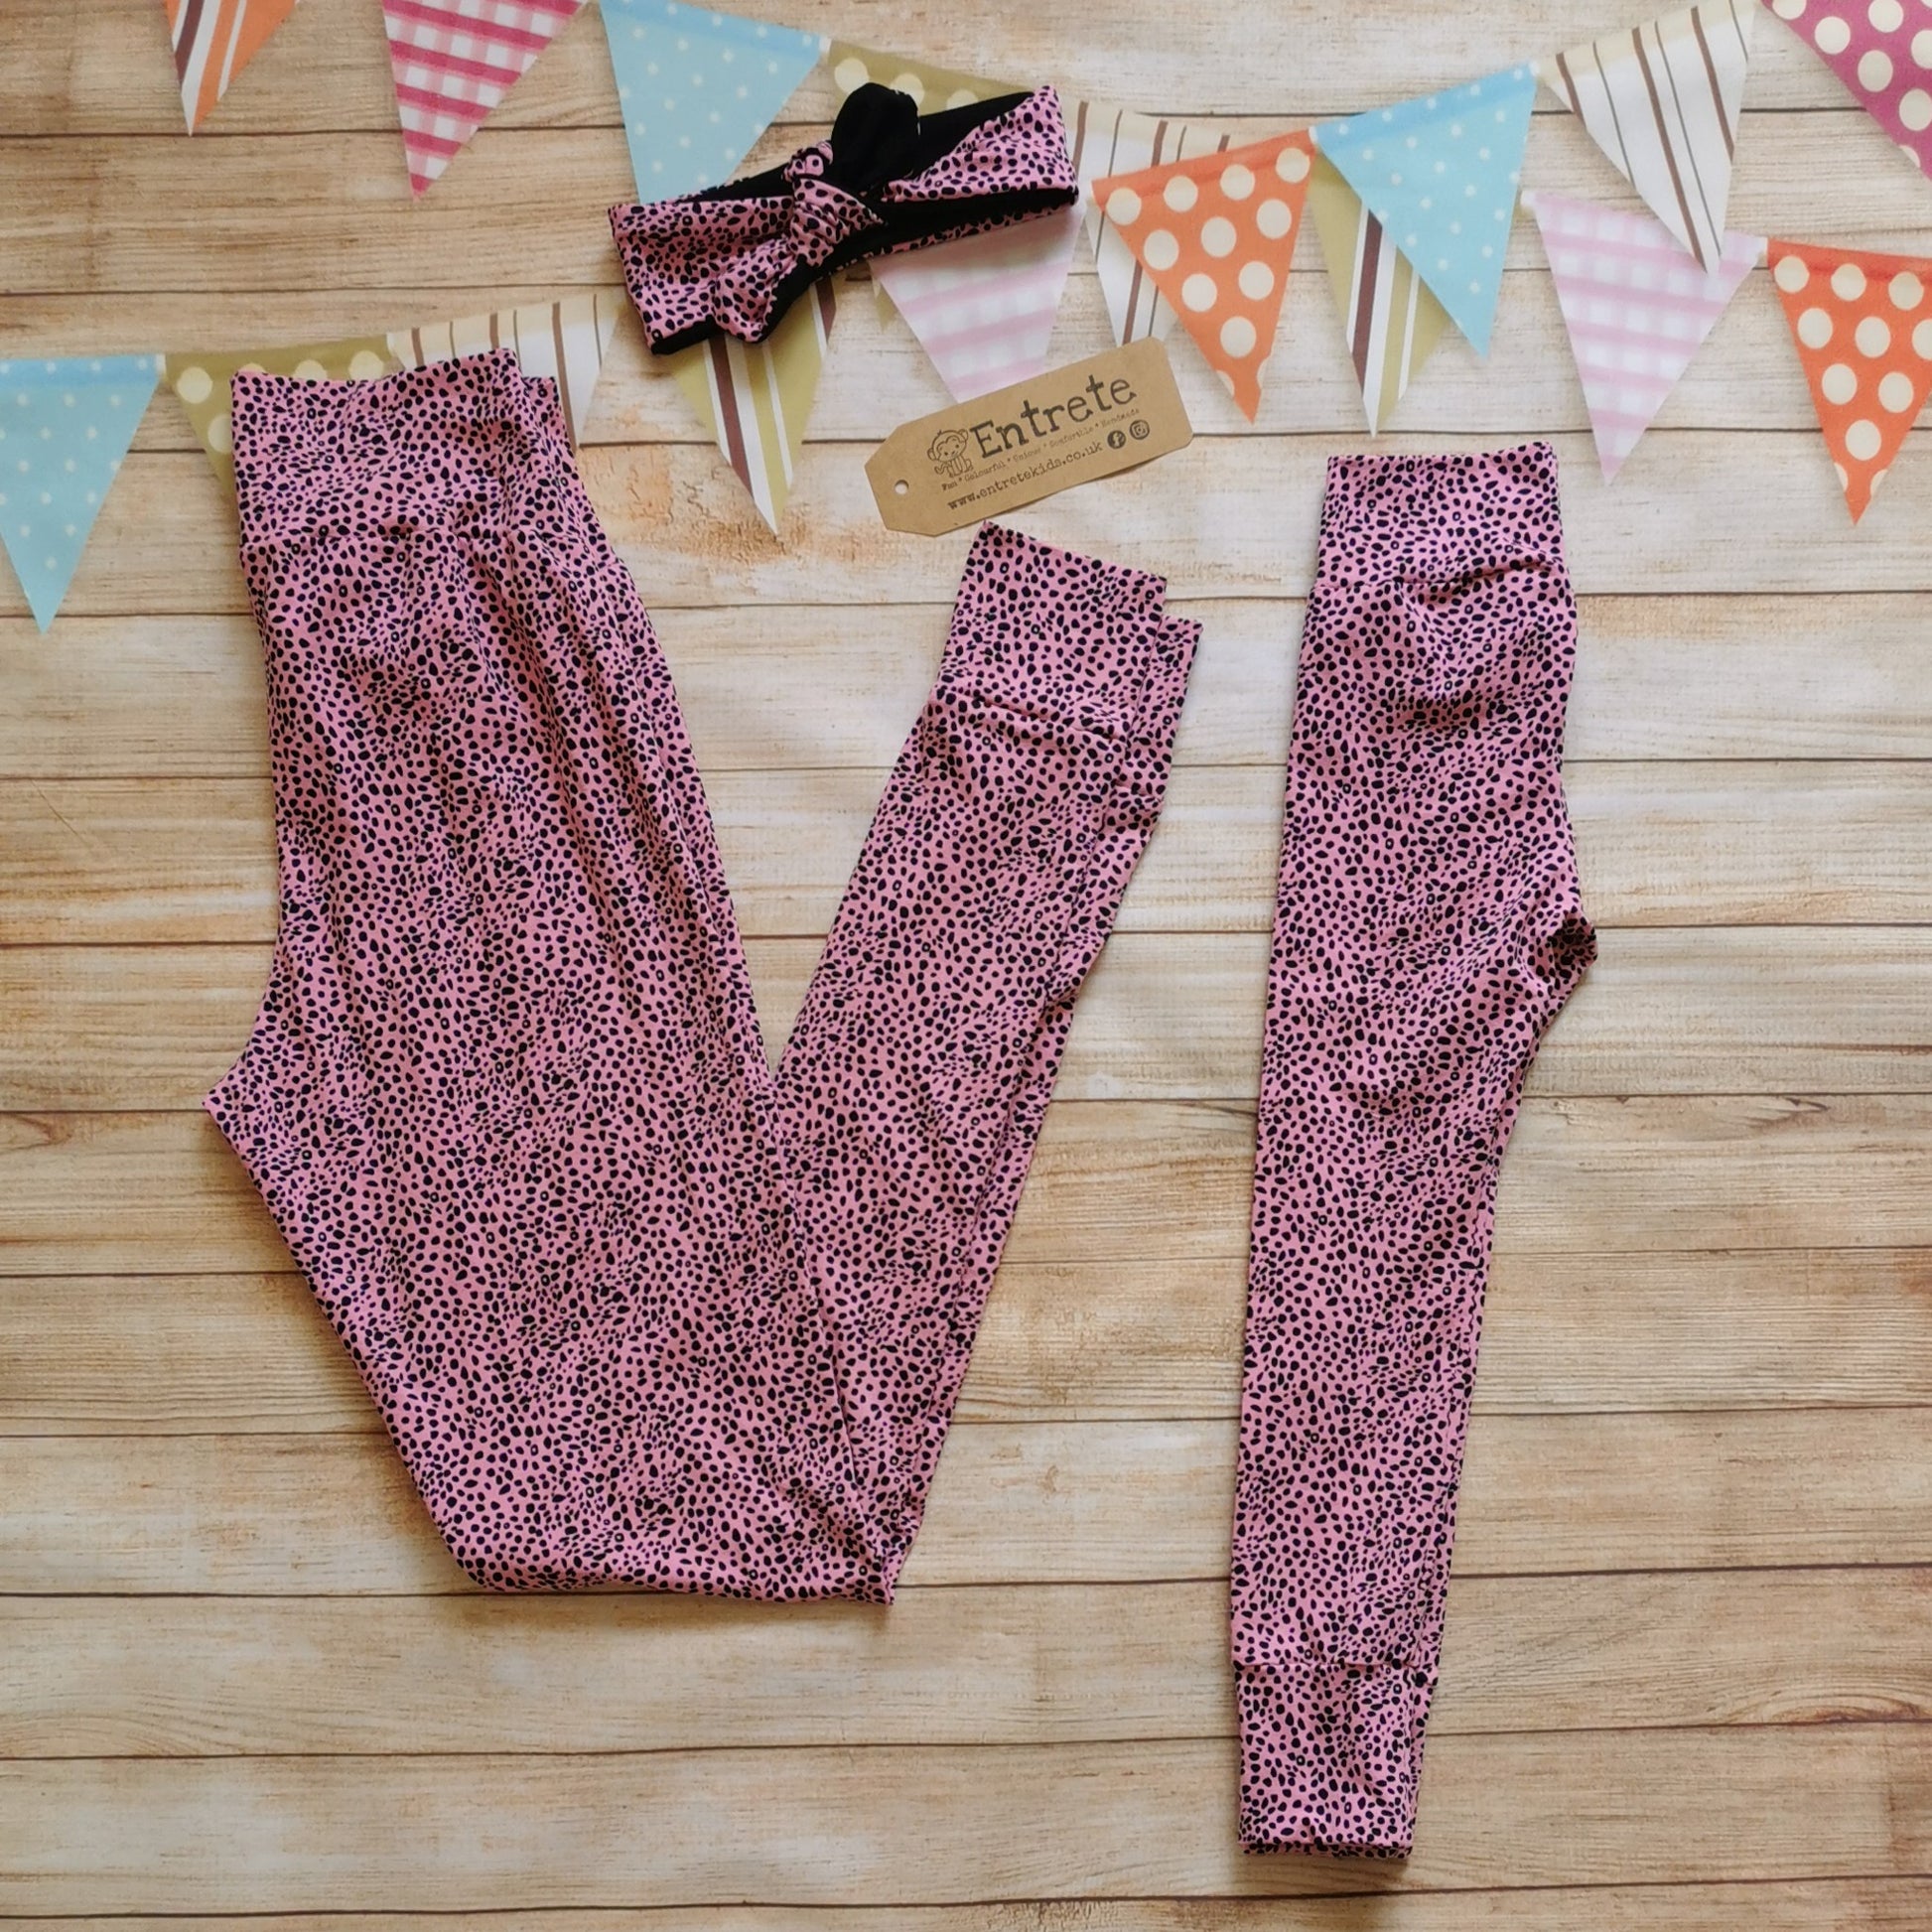 You and your mini can be pretty in pink cheetah print, with these matching leggings. Handmade using pink cheetah print cotton jersey.